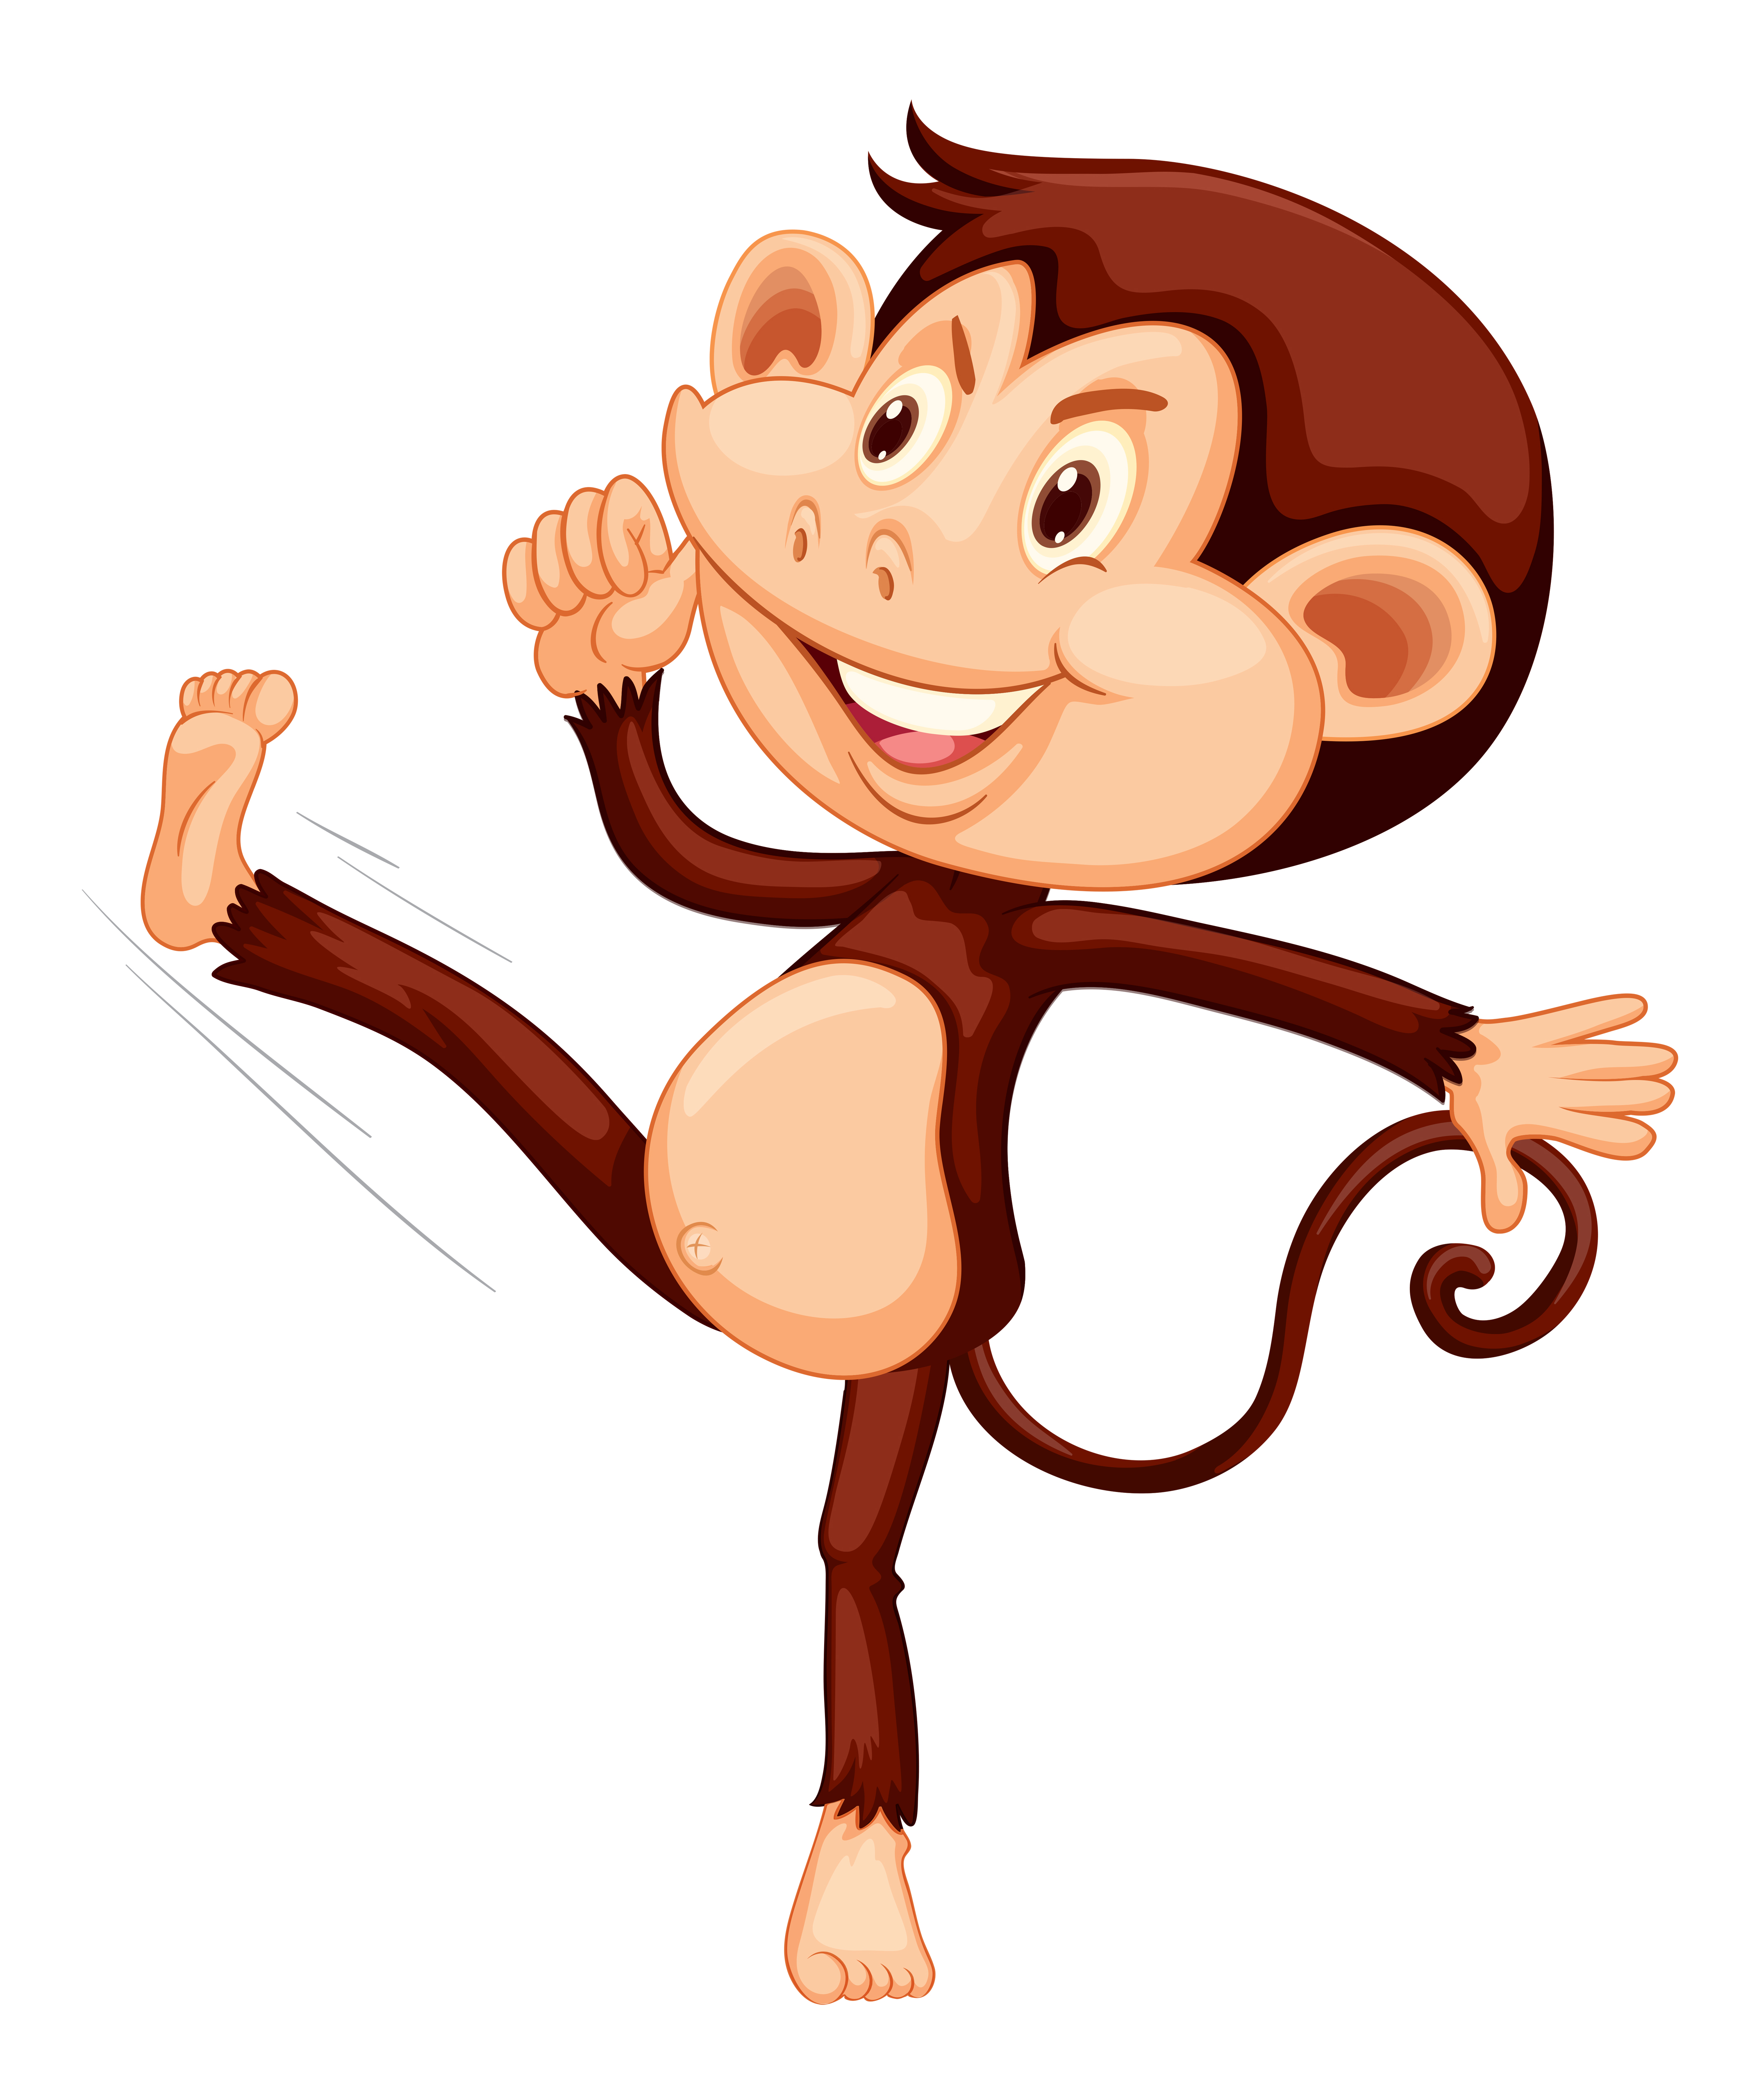 Download A happy monkey on white backgroung 419363 - Download Free Vectors, Clipart Graphics & Vector Art